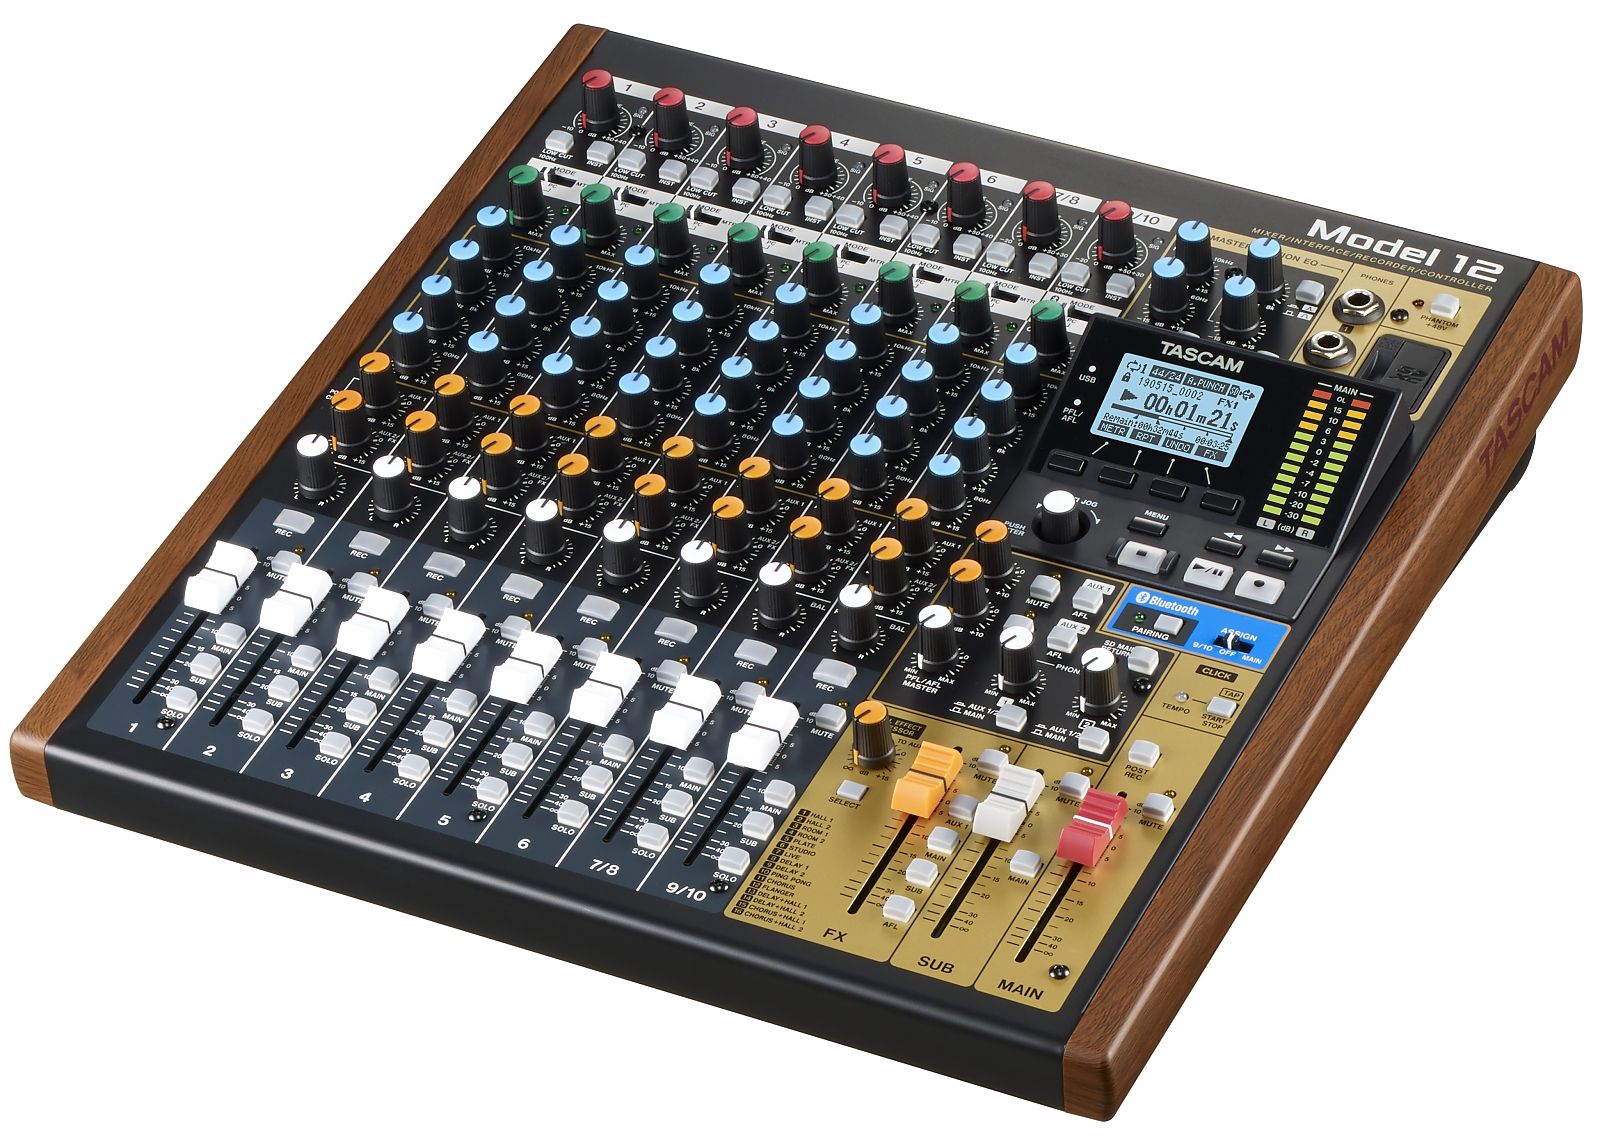 Tascam Model 12 10-Ch Analogue Mixer with 16-Track Digital Recorder